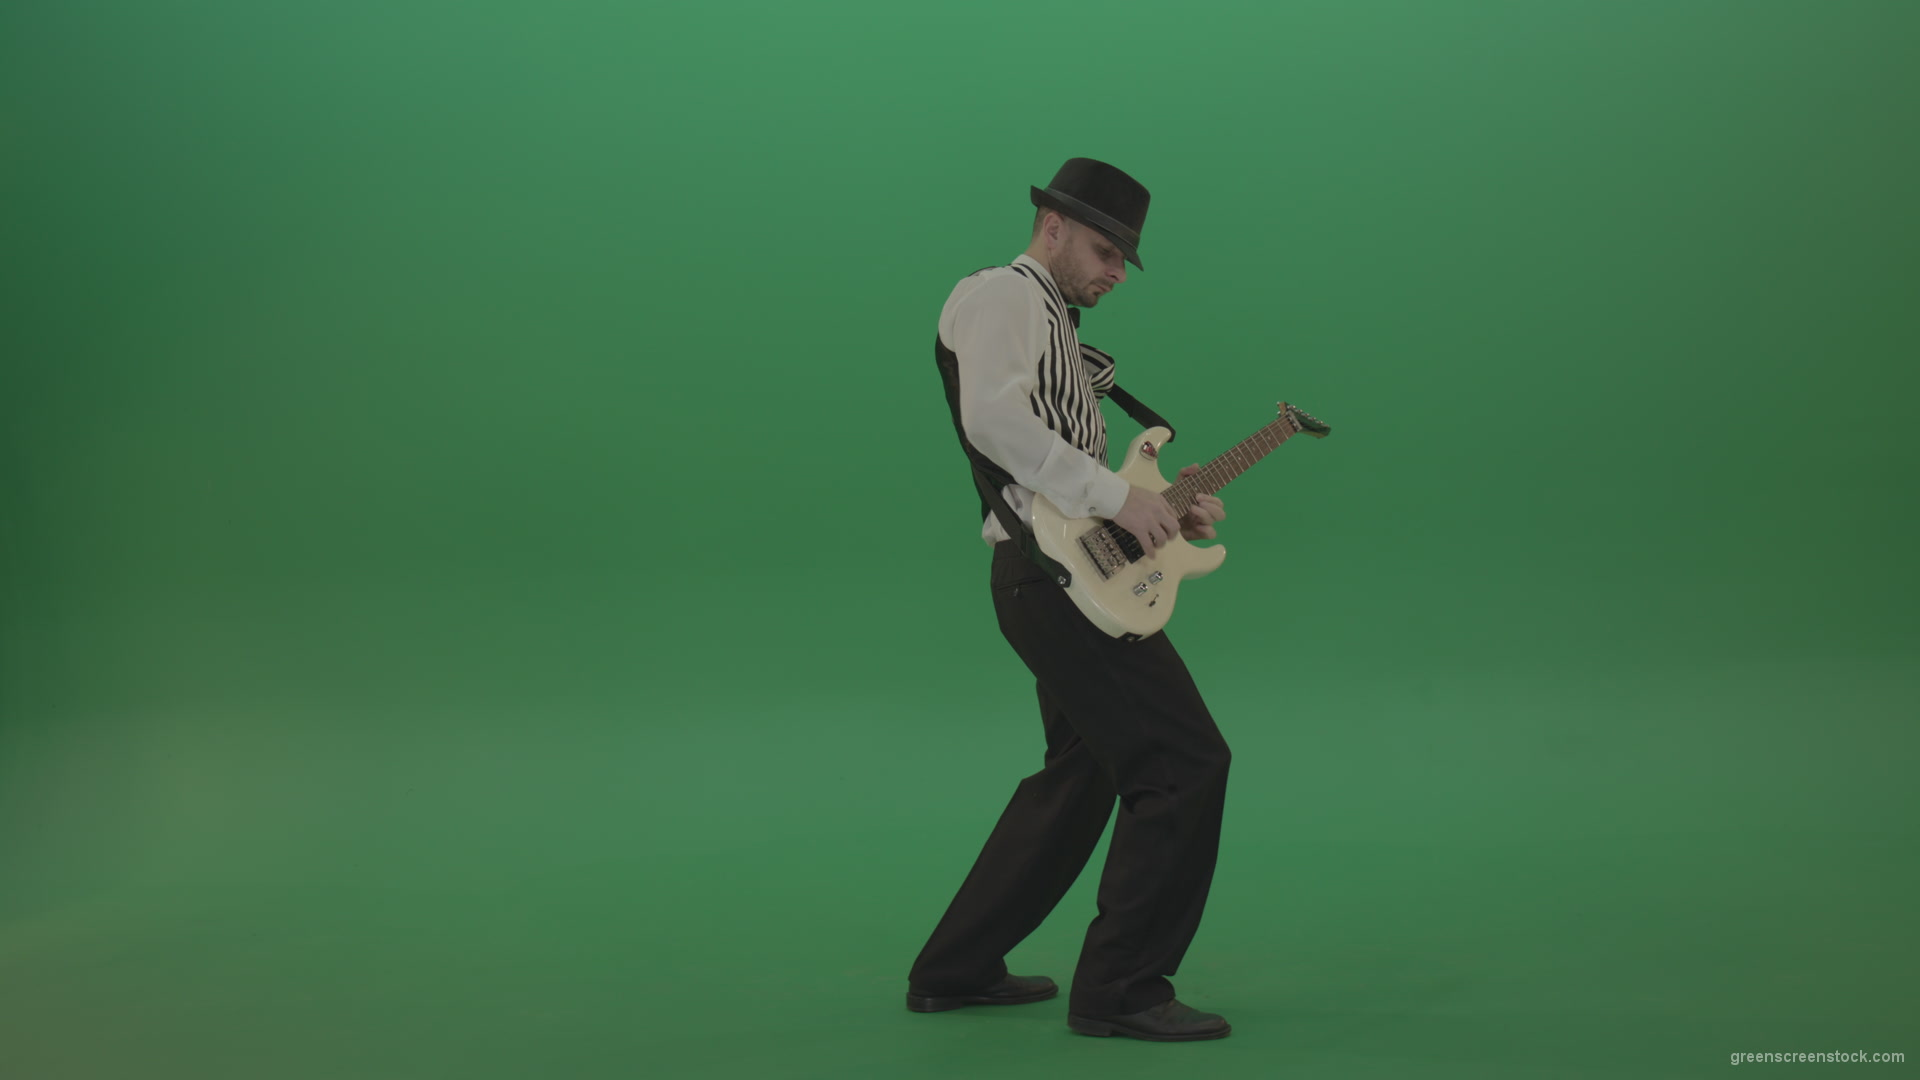 Jazz-man-musician-play-guitar-solo-music-in-guitar-on-green-screen-isolated-in-side-view_008 Green Screen Stock